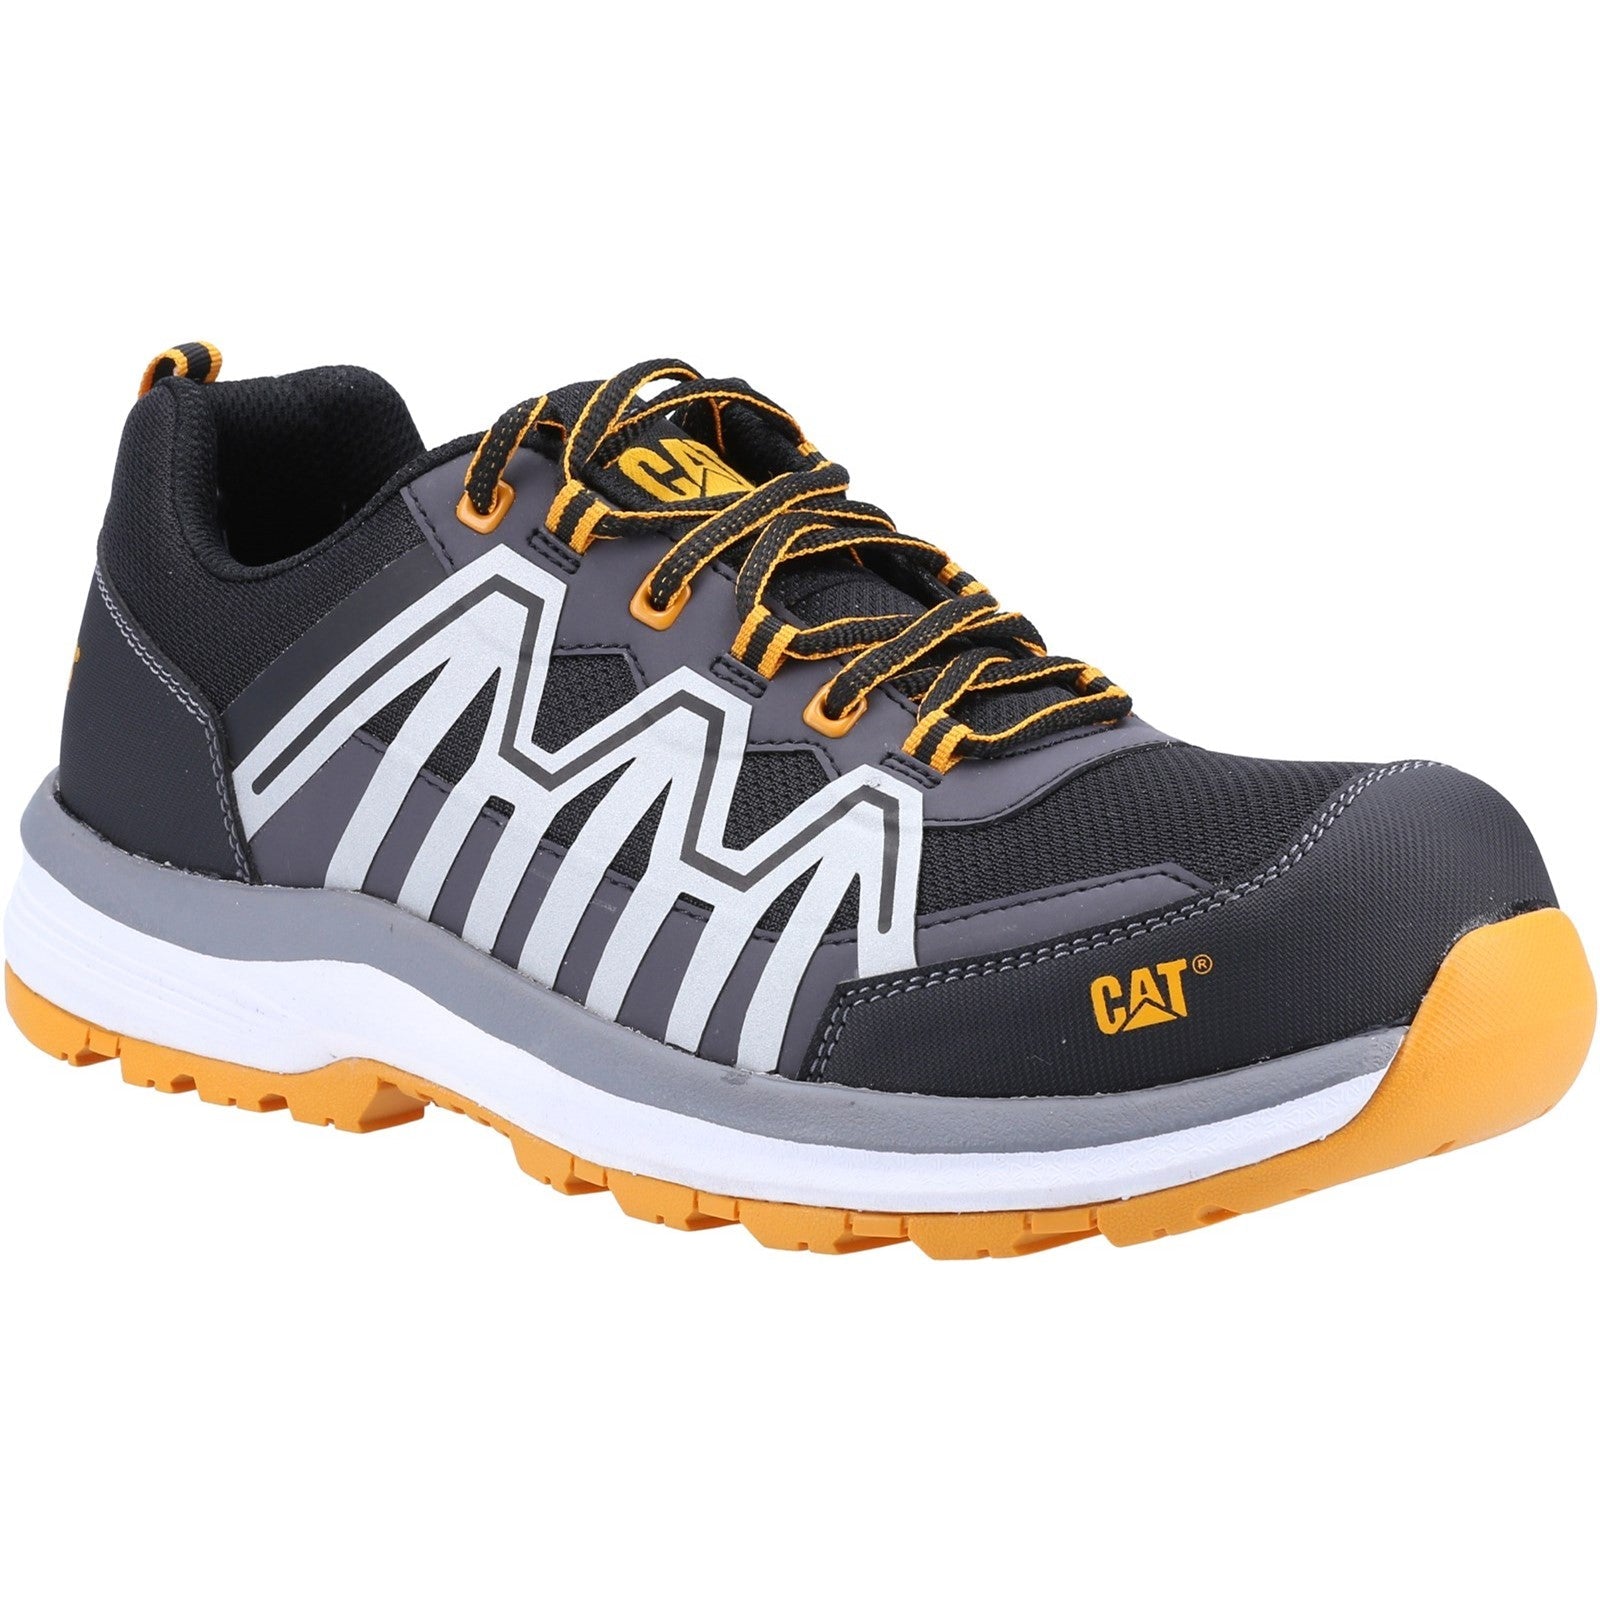 CAT Charge S3 Safety Trainer